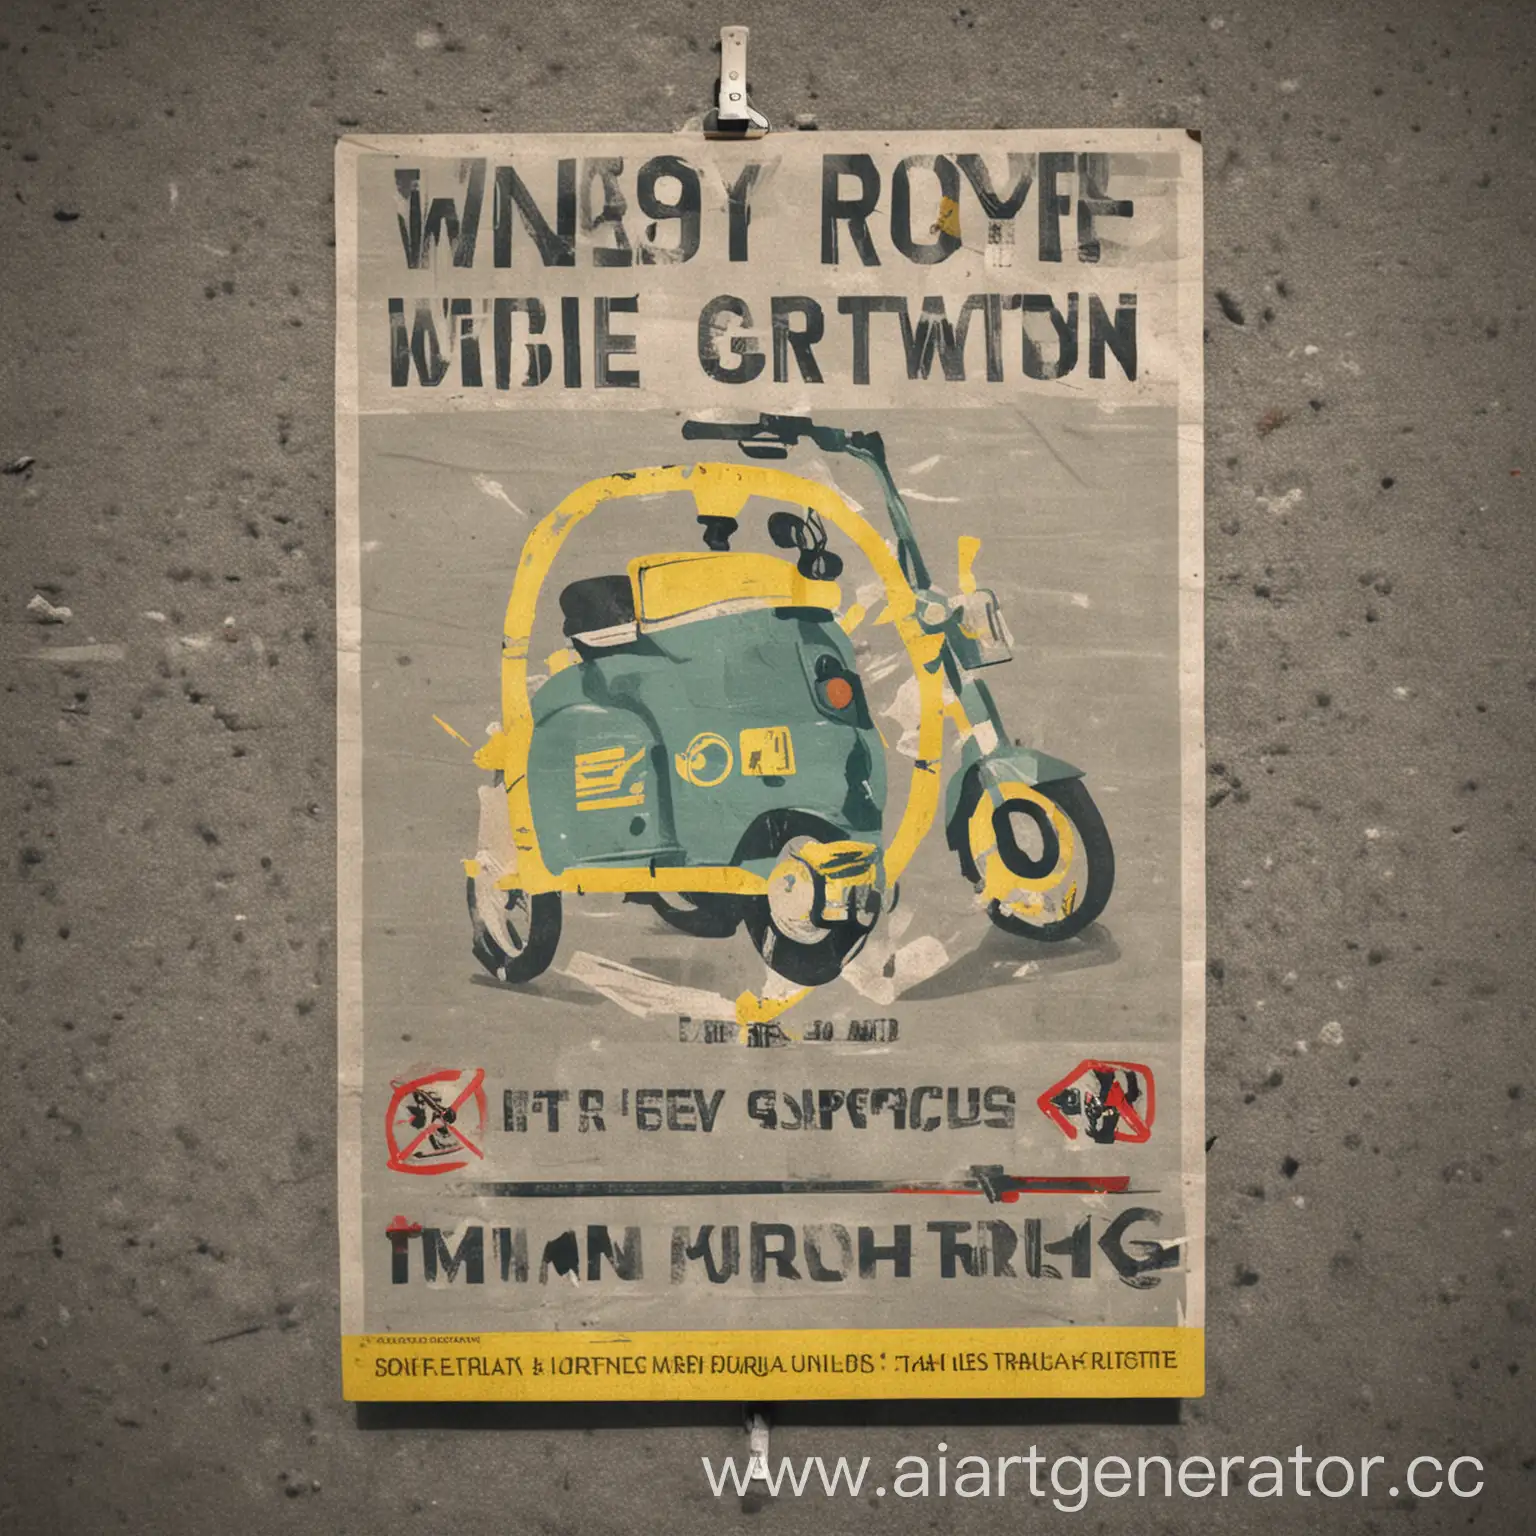 Promoting-Safe-Urban-Mobility-Traffic-Rules-Poster